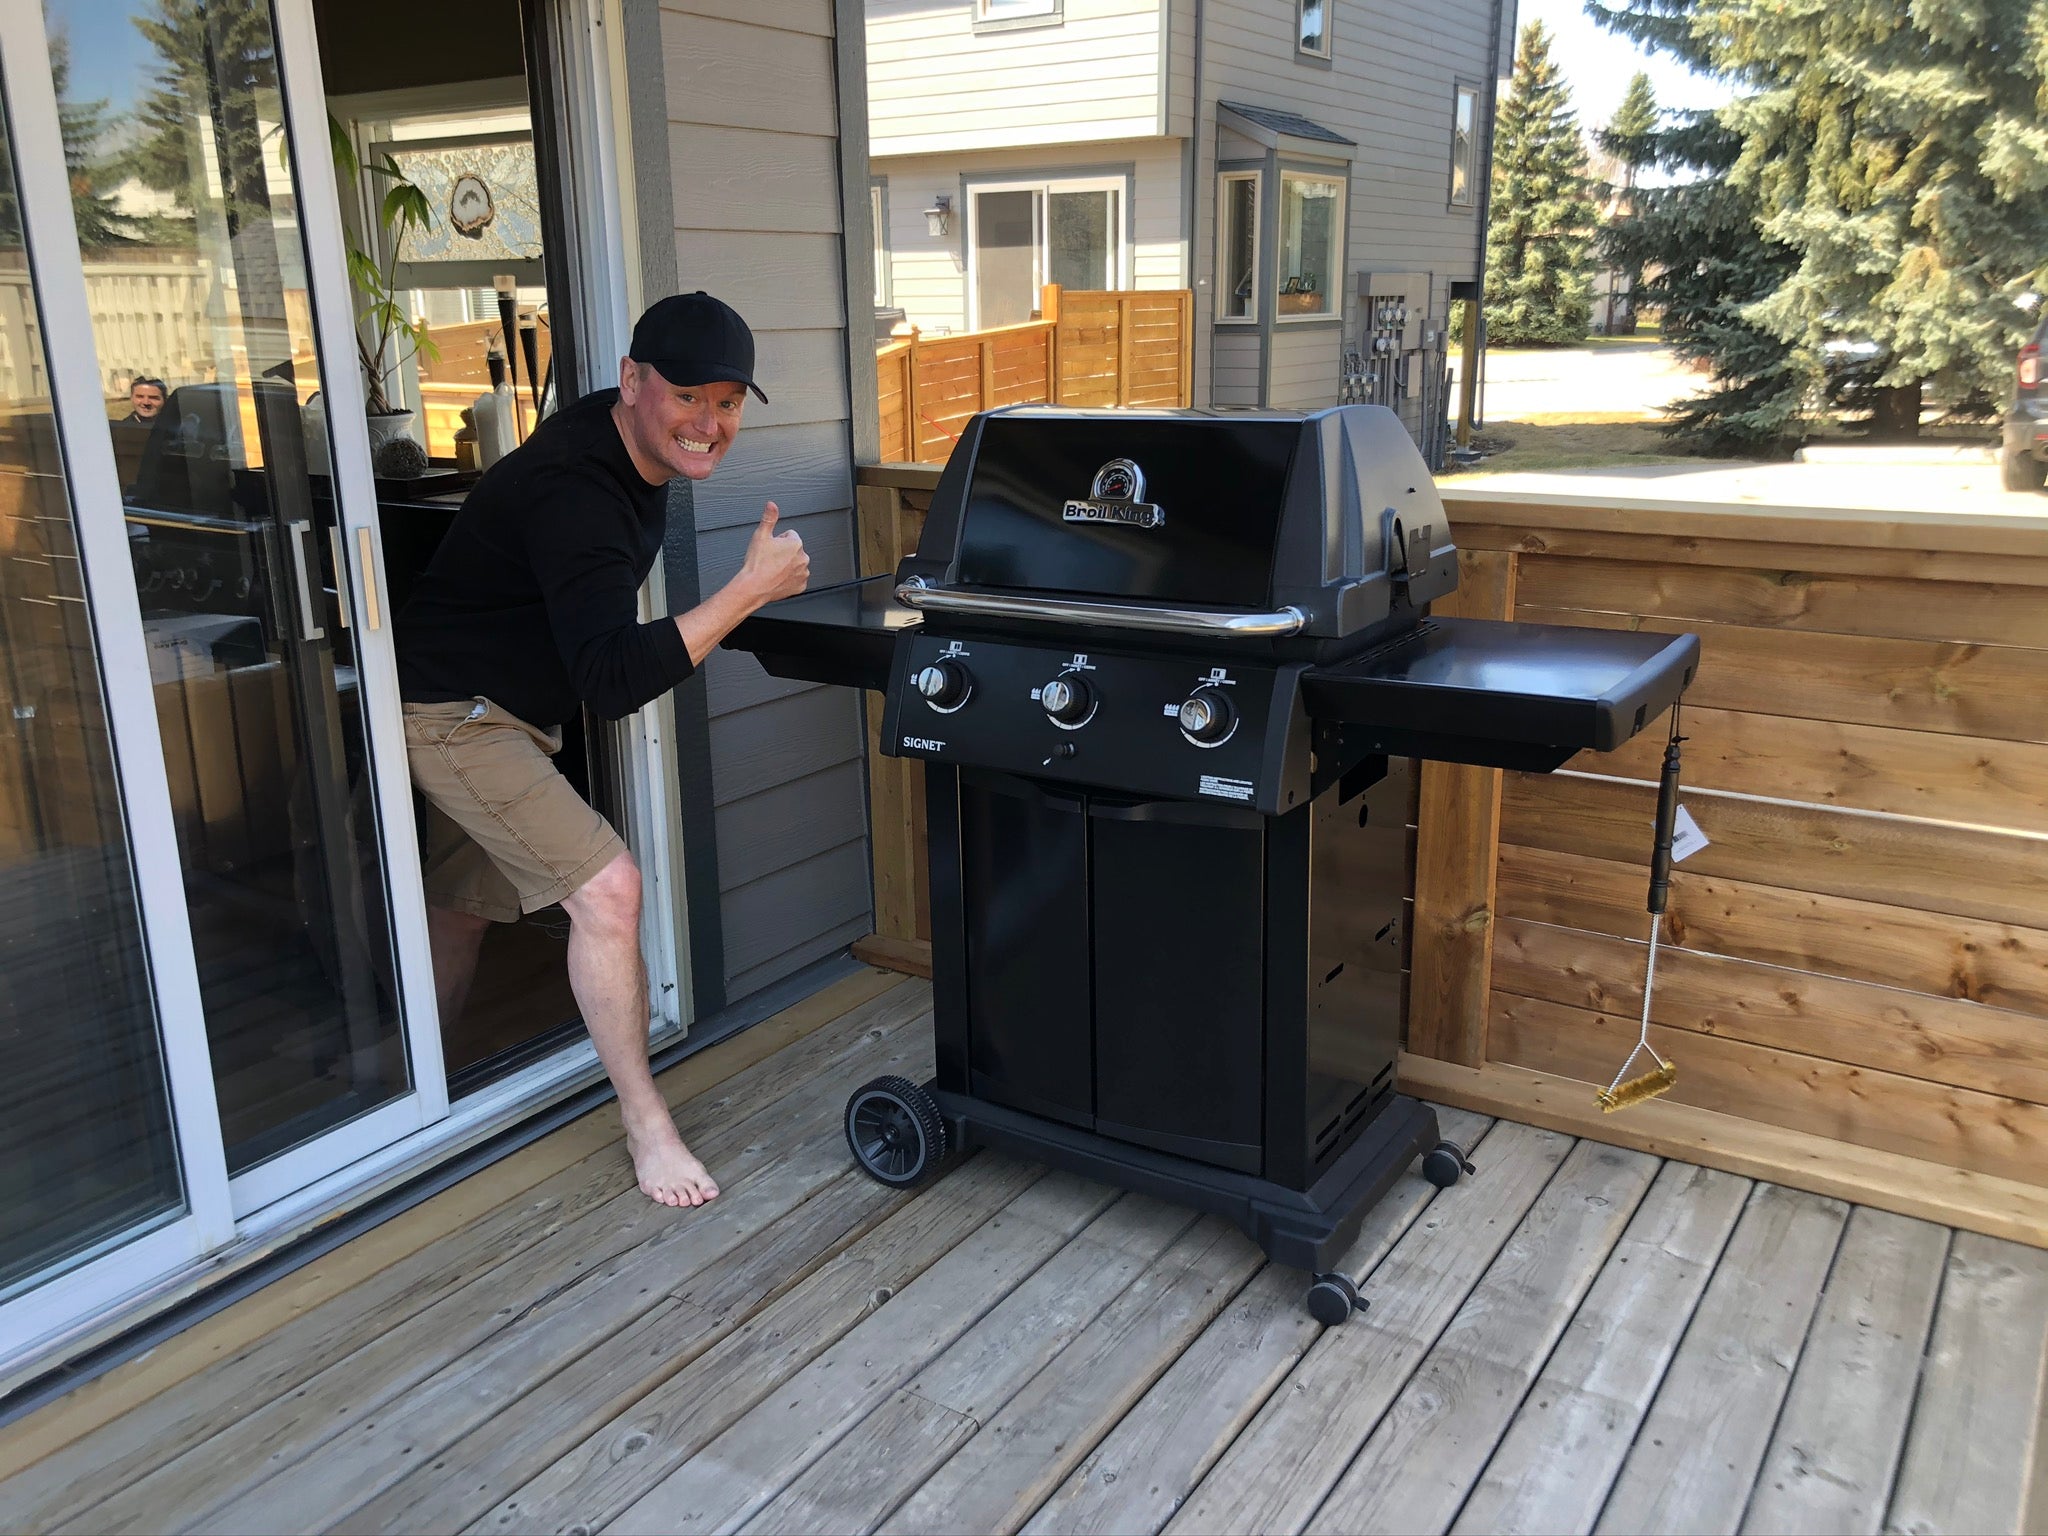 Broil King Black Signet 320 with Happy Customer Grill Delivery by Barbecues Galore